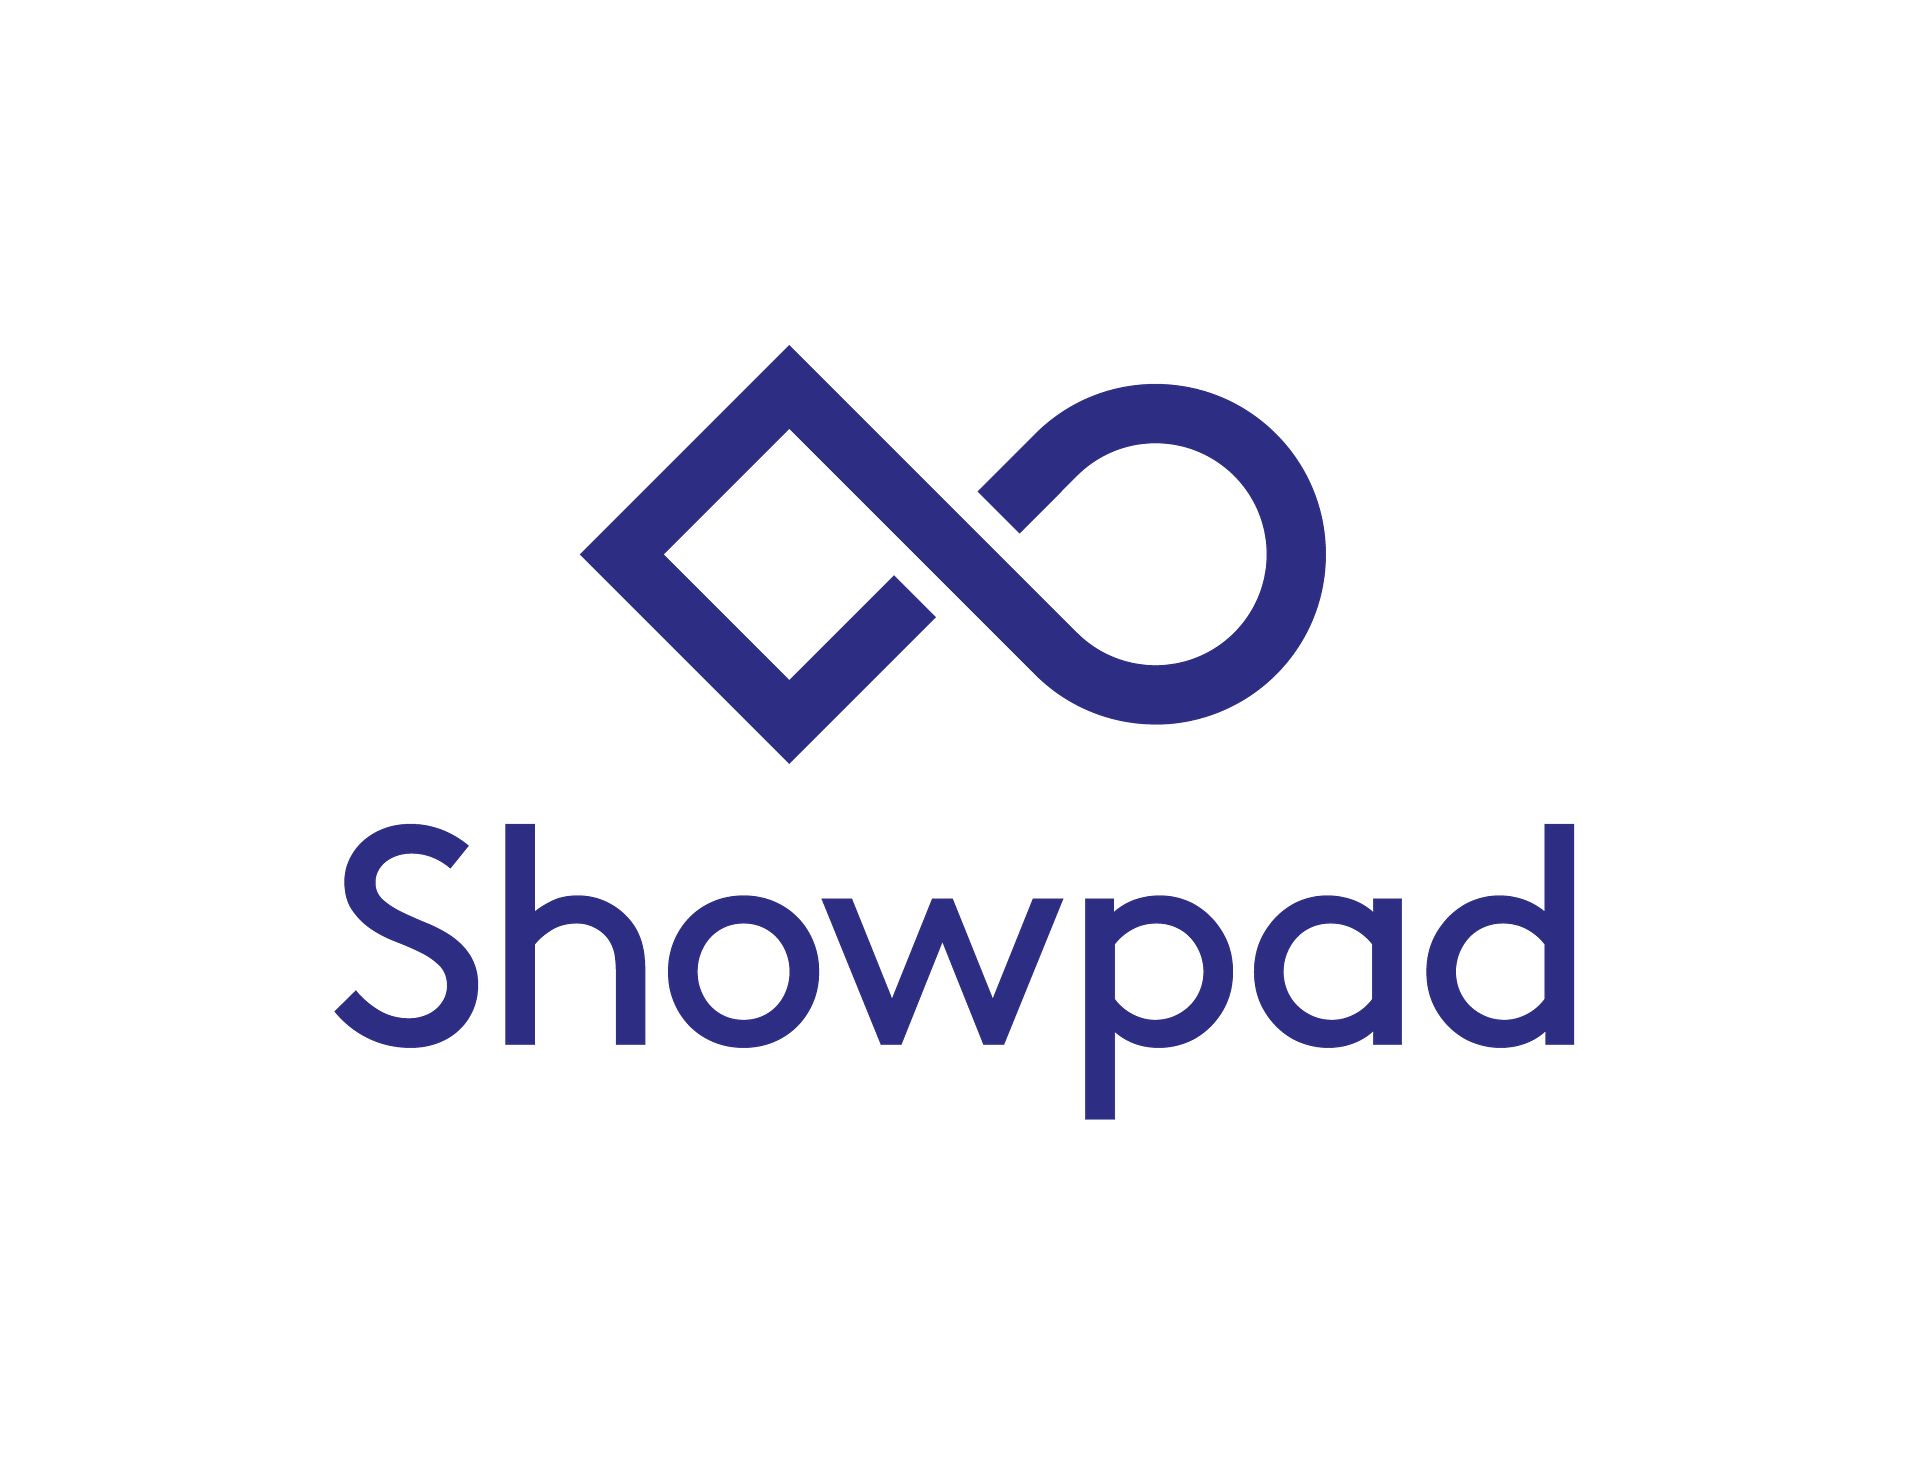 The Showpad sales enablement platform integrates industry-leading training and coaching software with innovative content solutions, driving increased sales.